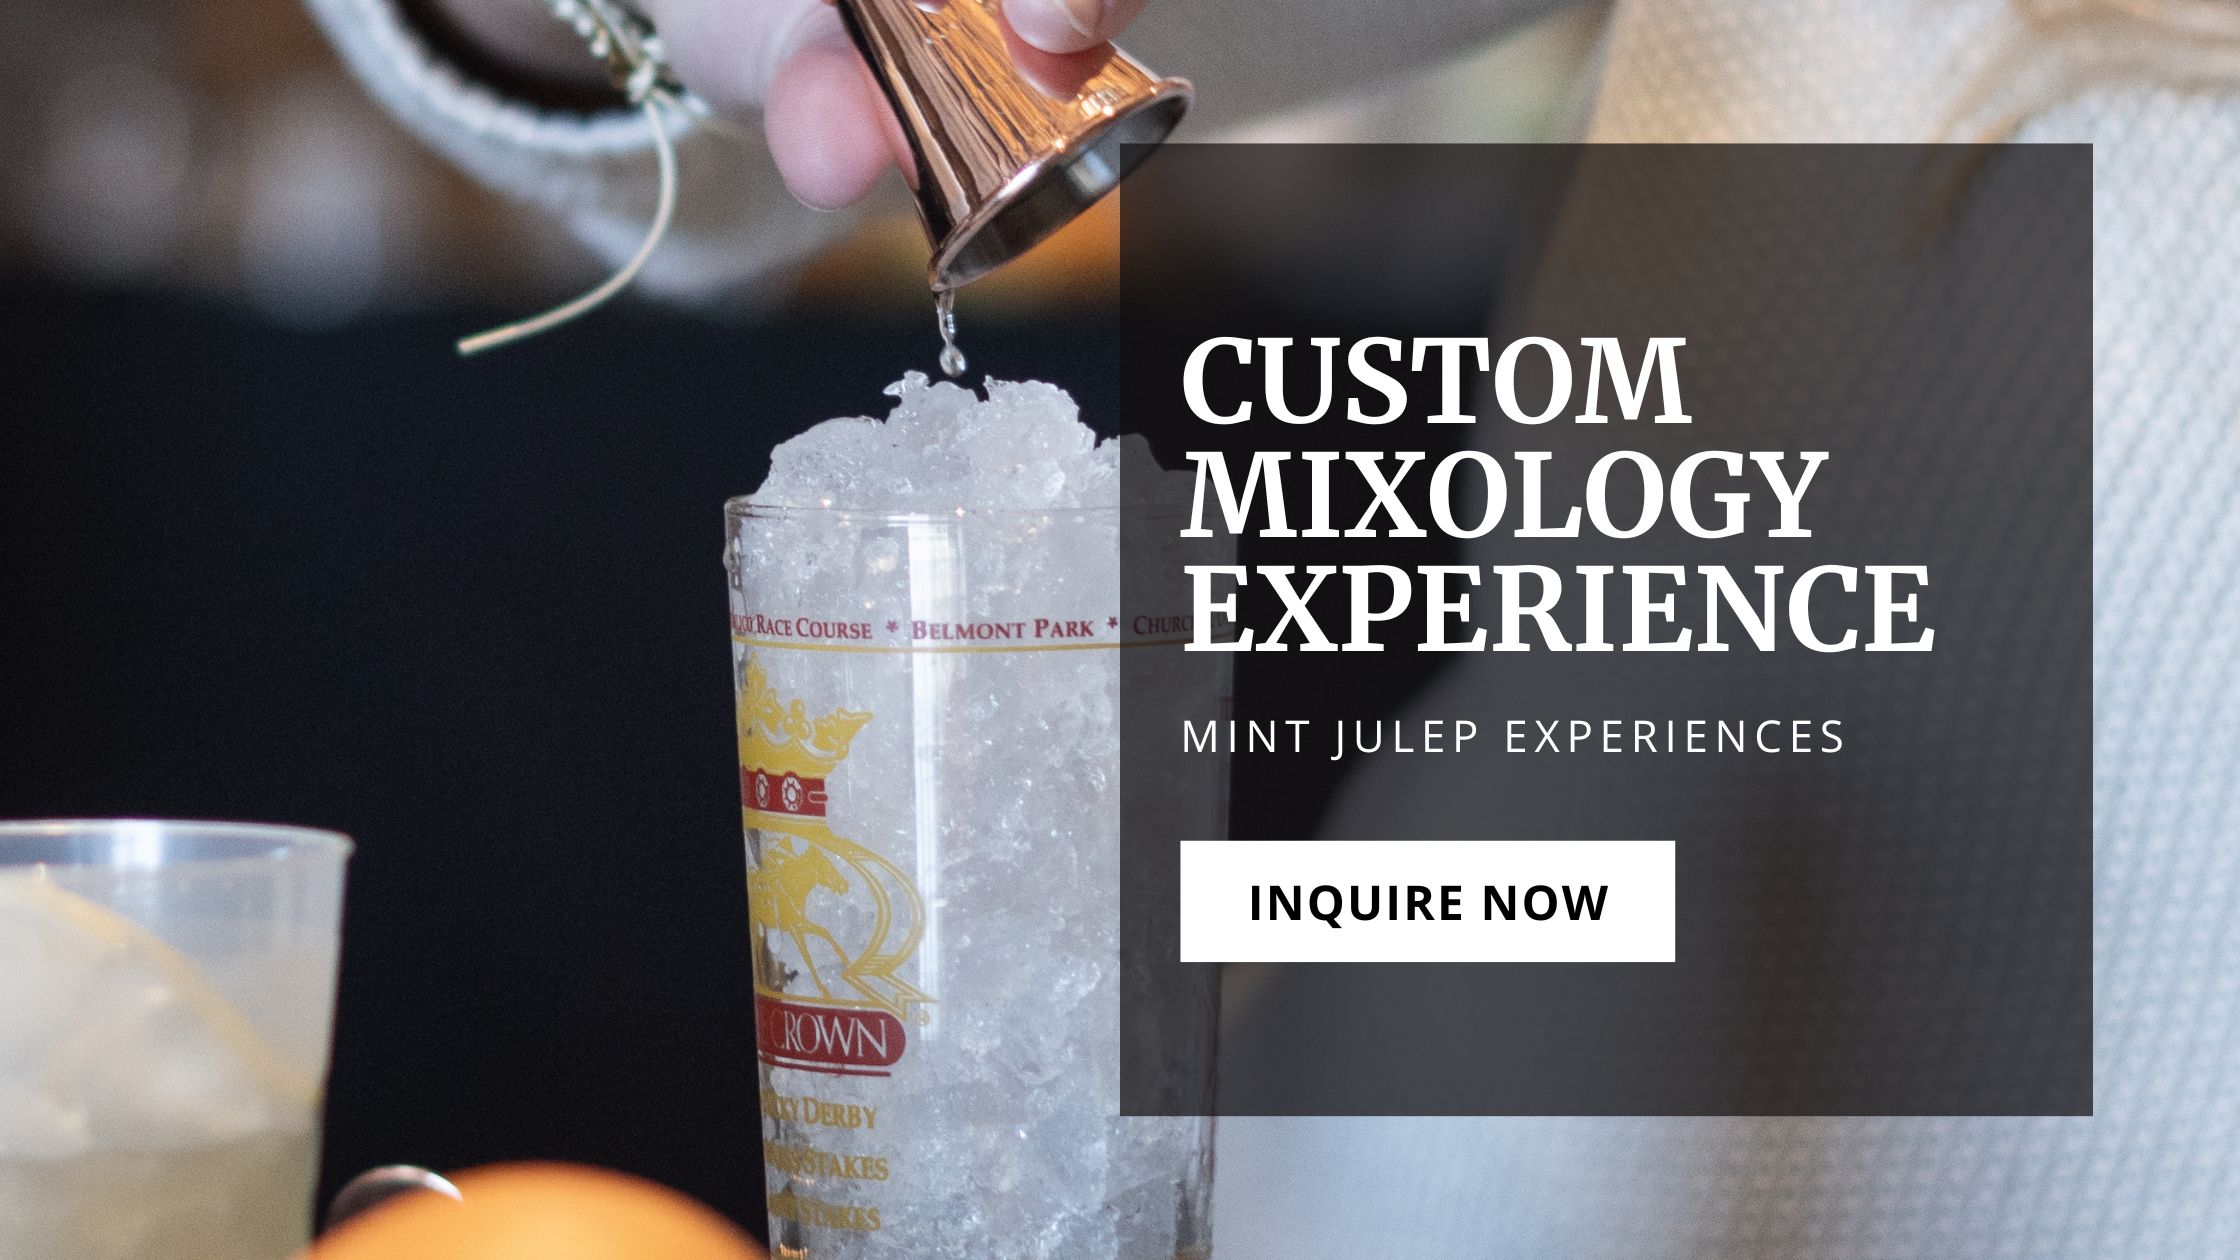 Mixology Experience - Inquire Now